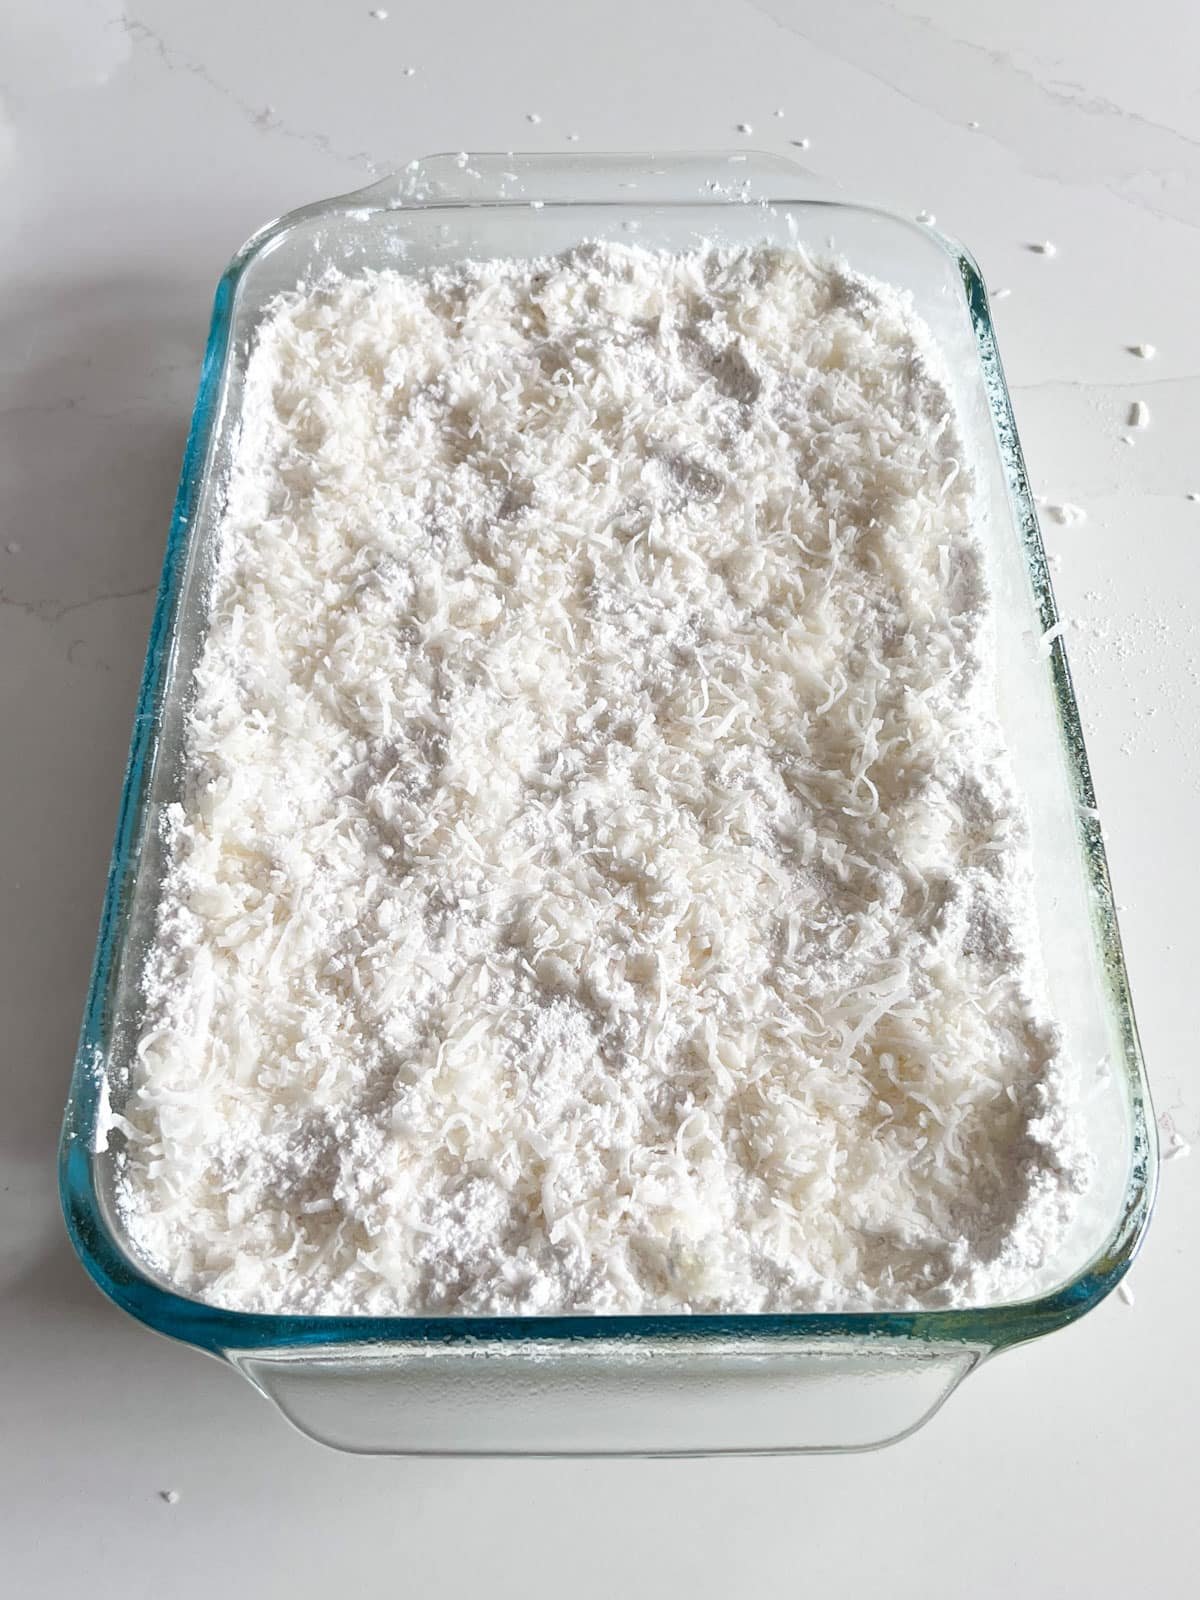 A layer of coconut sprinkled on top of the cake mix layer in a glass baking pan.